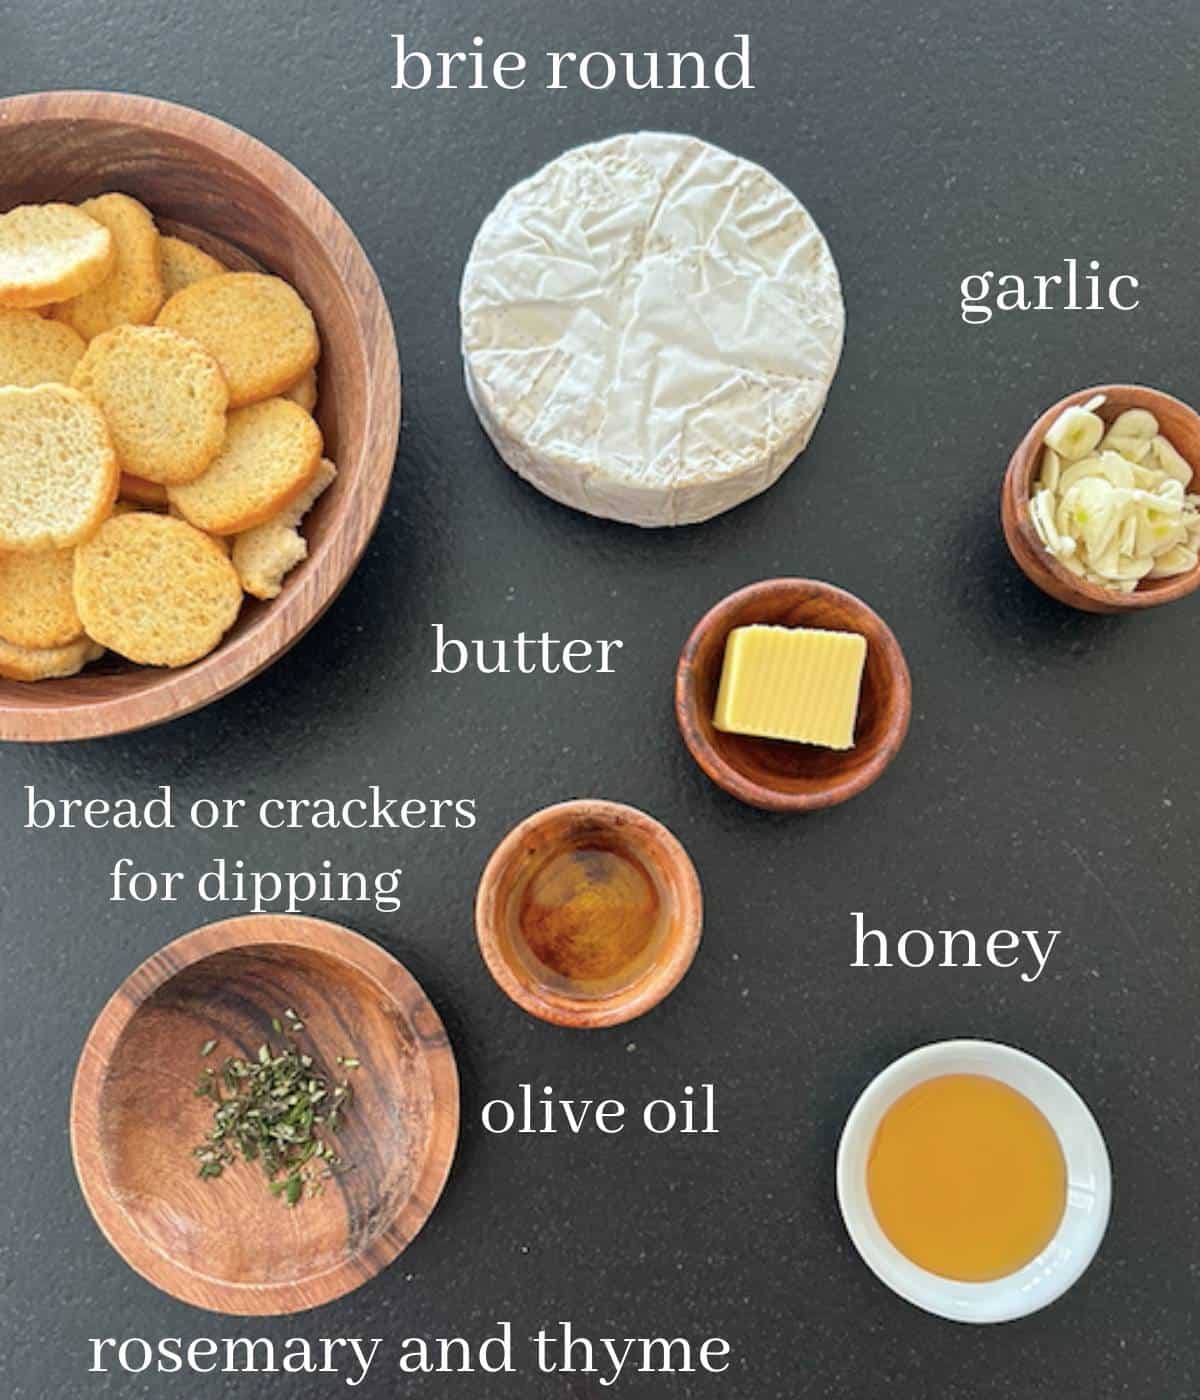 Ingredients for Baked garlic brie.